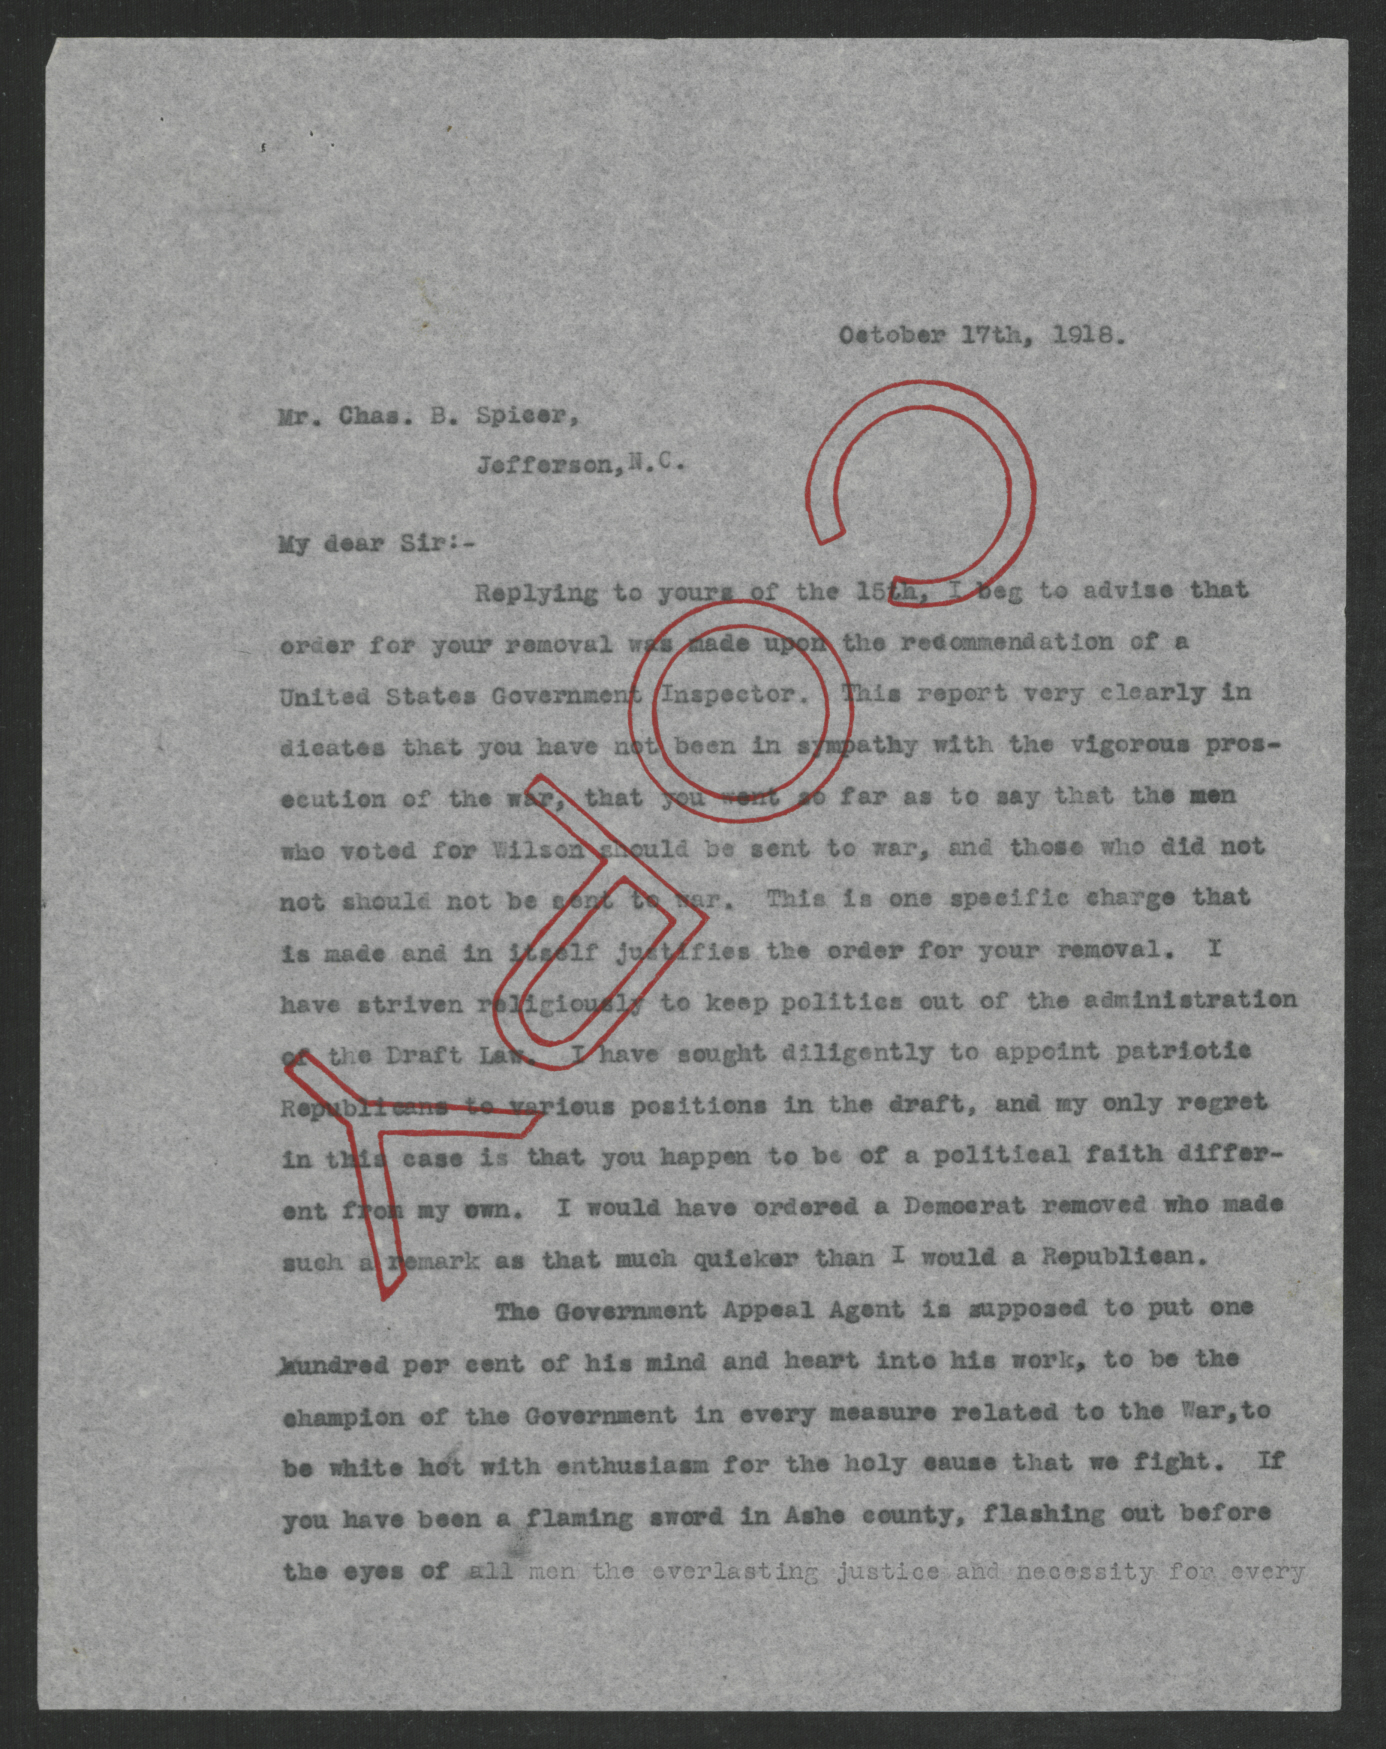 Letter from Thomas W. Bickett to Charles B. Spicer, October 17, 1918, page 1